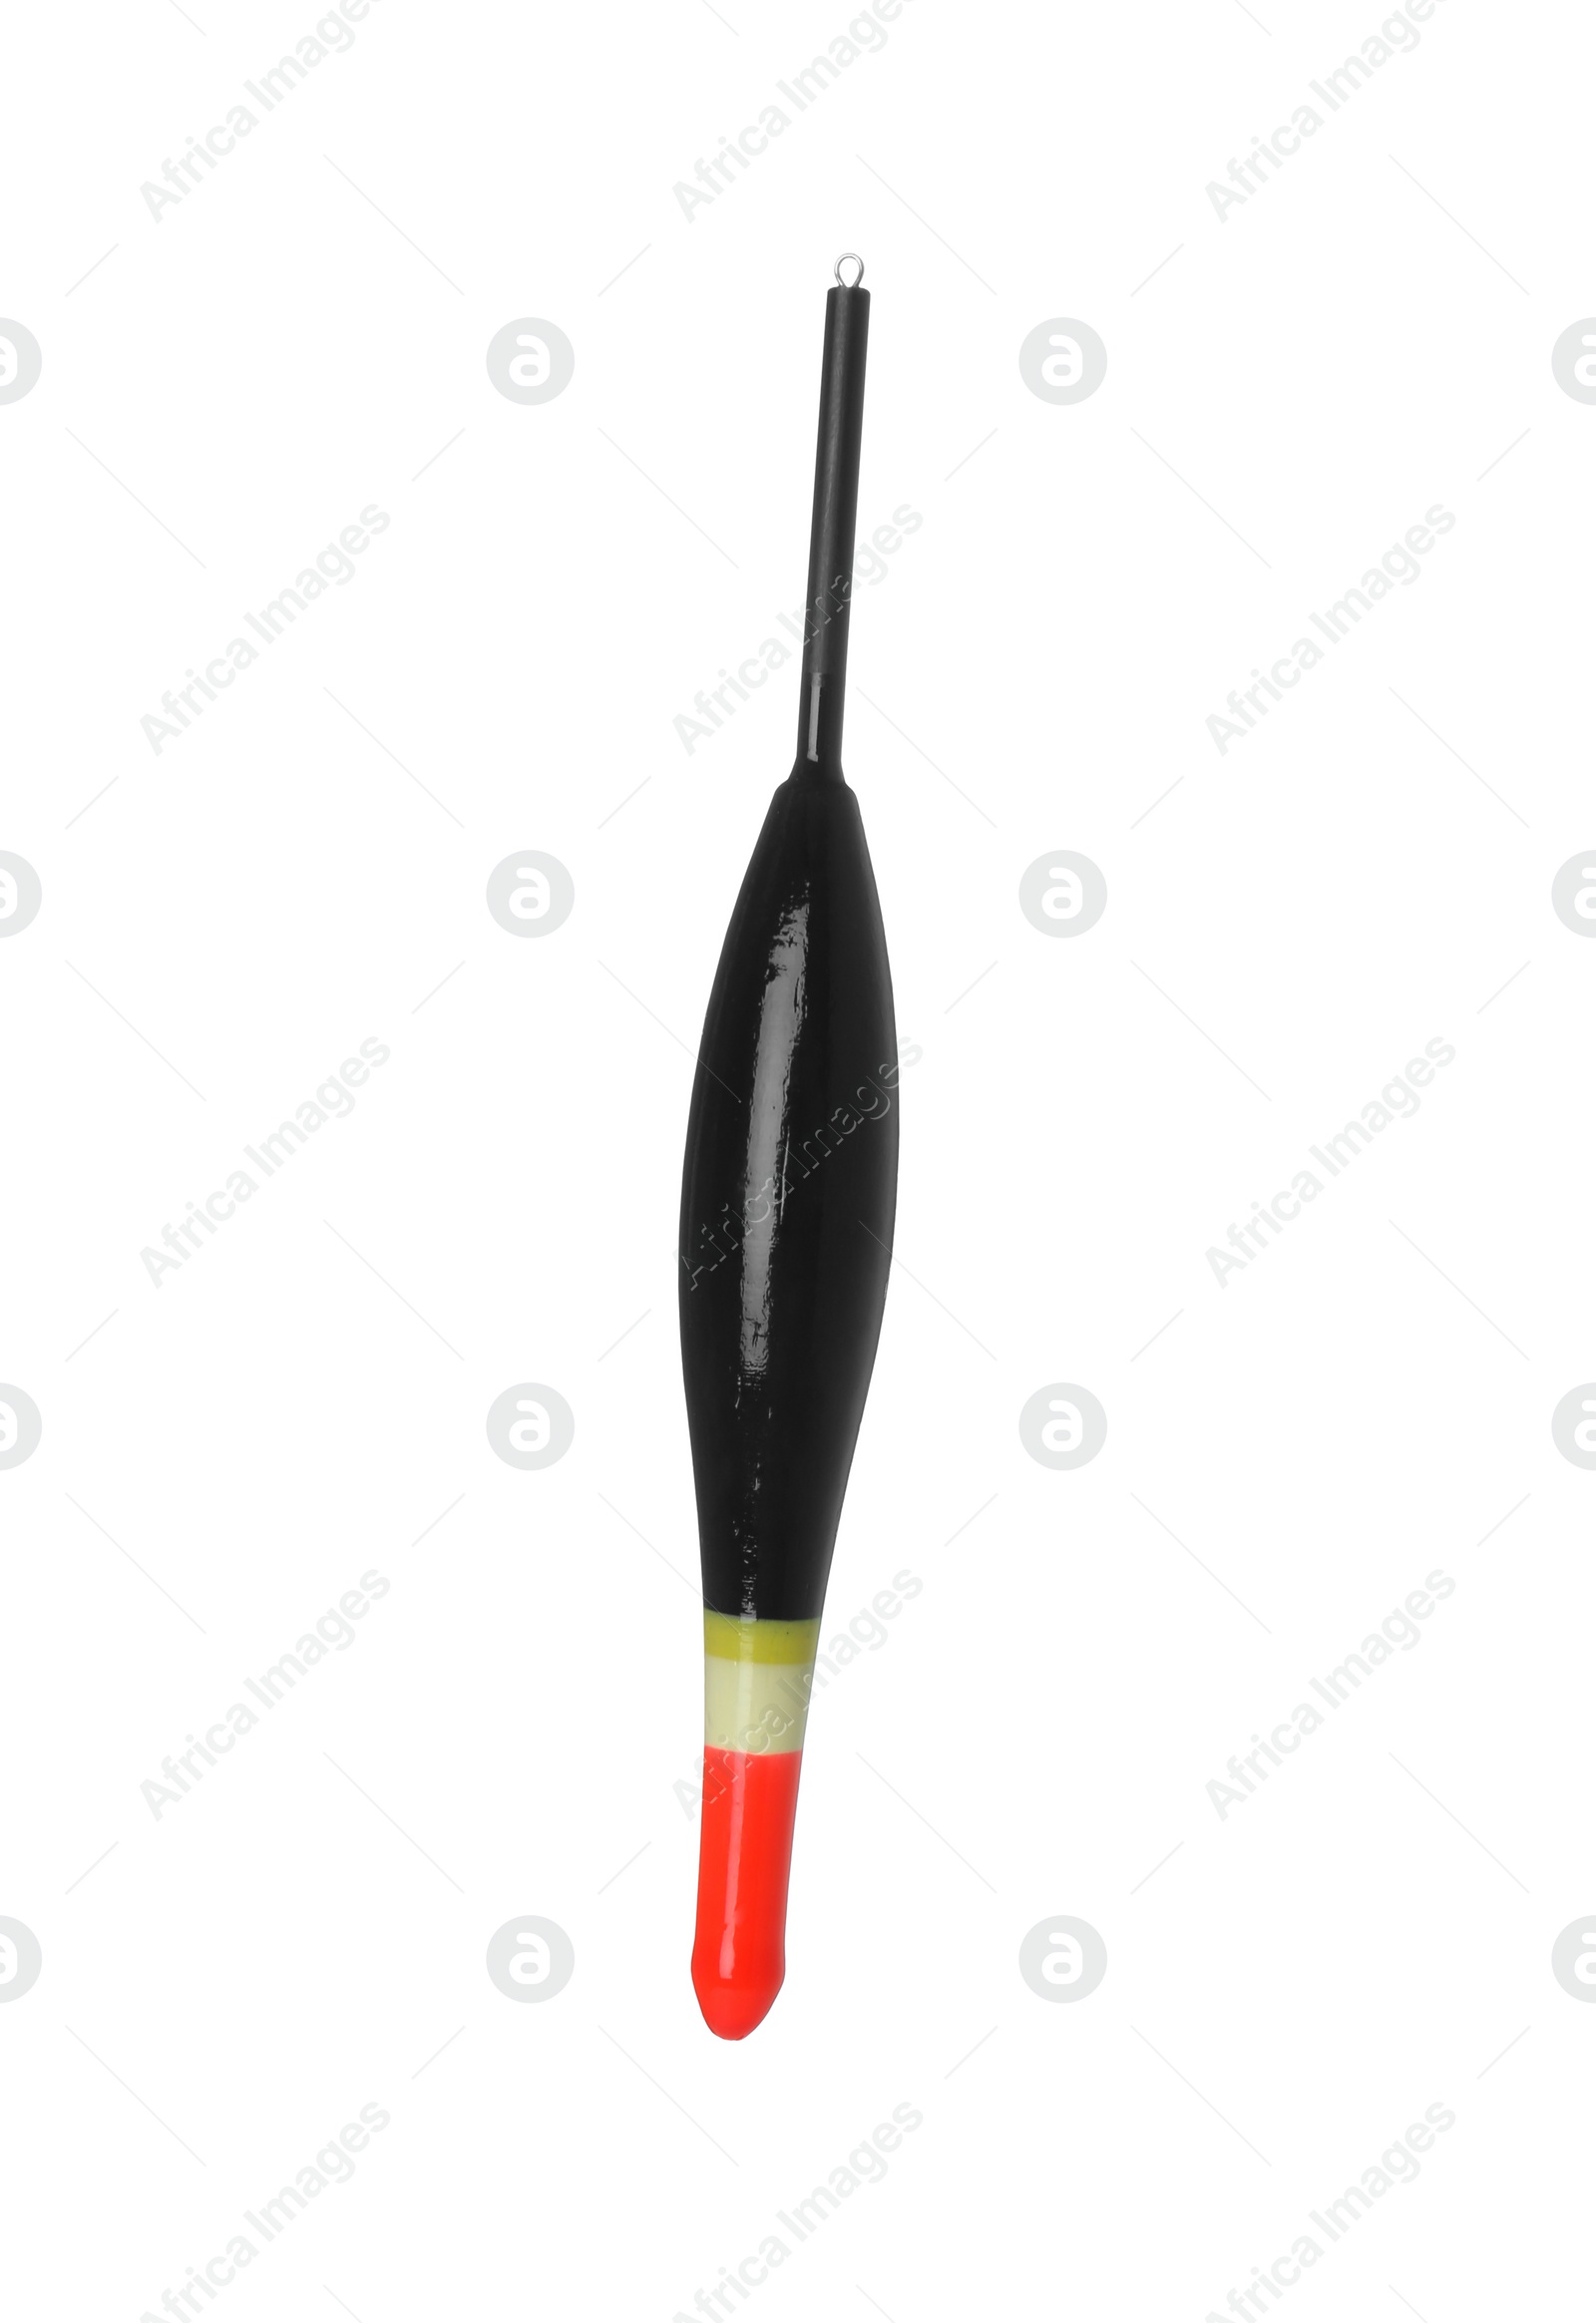 Photo of Fishing float on white background. Angling equipment